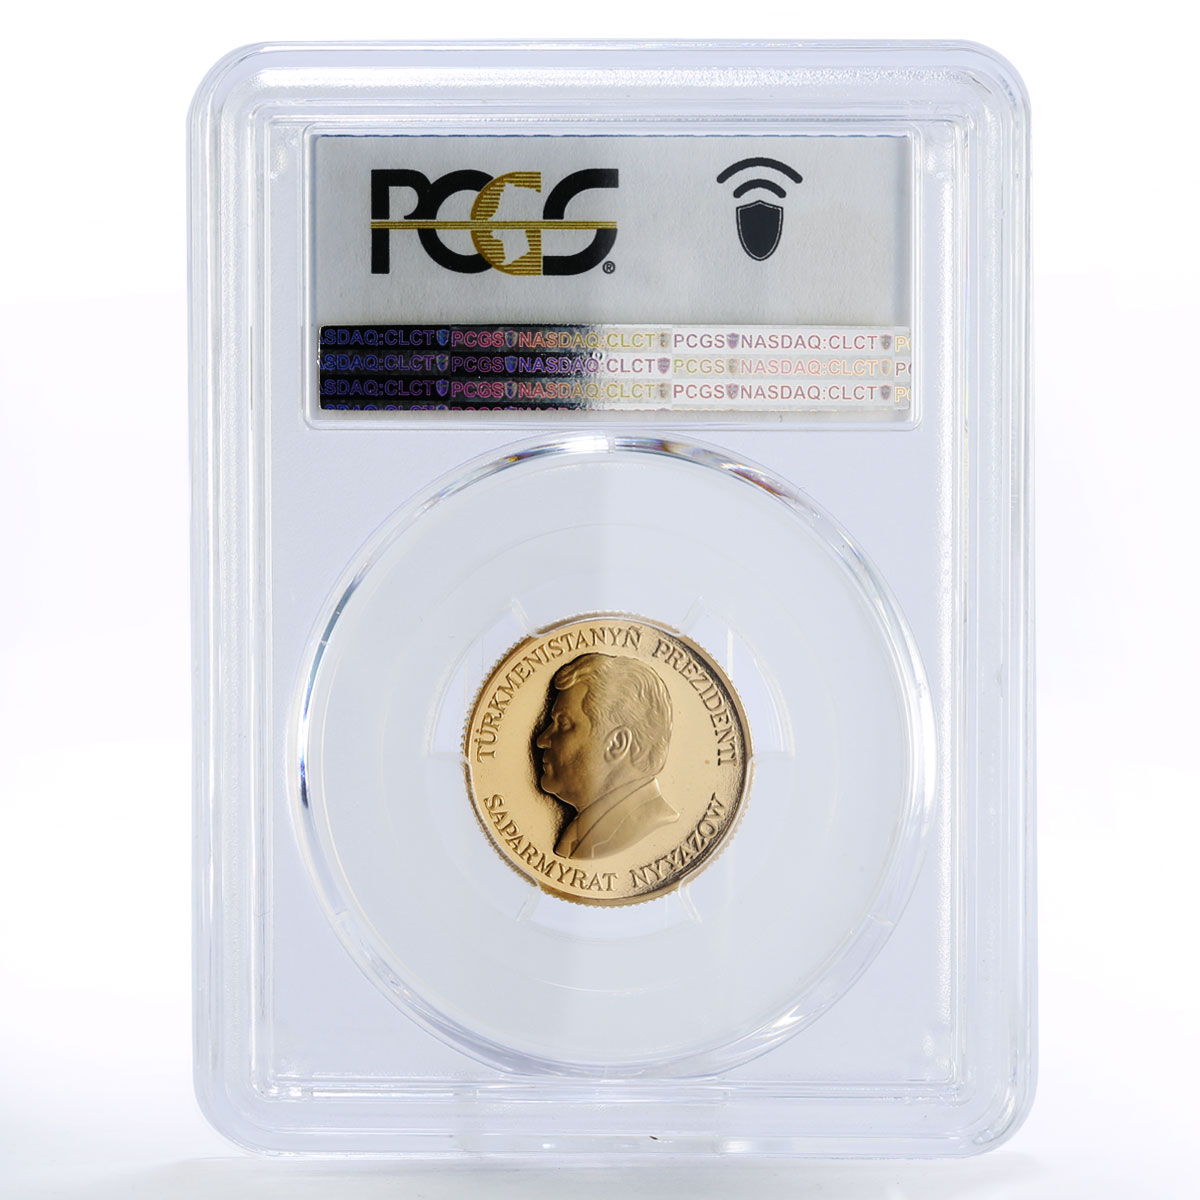 Turkmenistan 1000 manat 5th Anniversary of Independence PR69 PCGS gold coin 1996